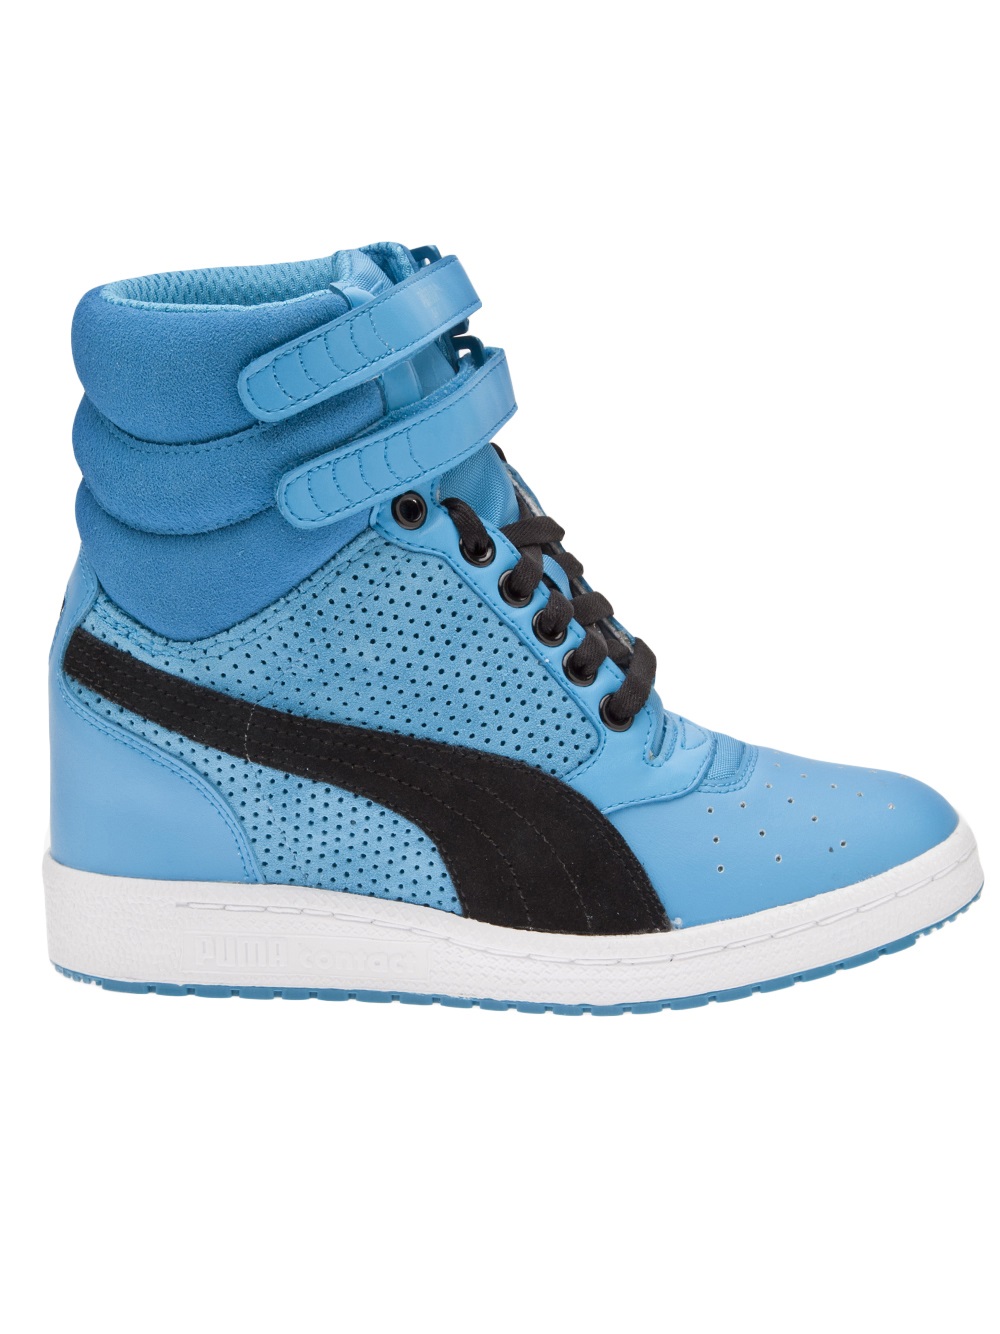 PUMA High Top Wedge in Turquoise (Blue) | Lyst